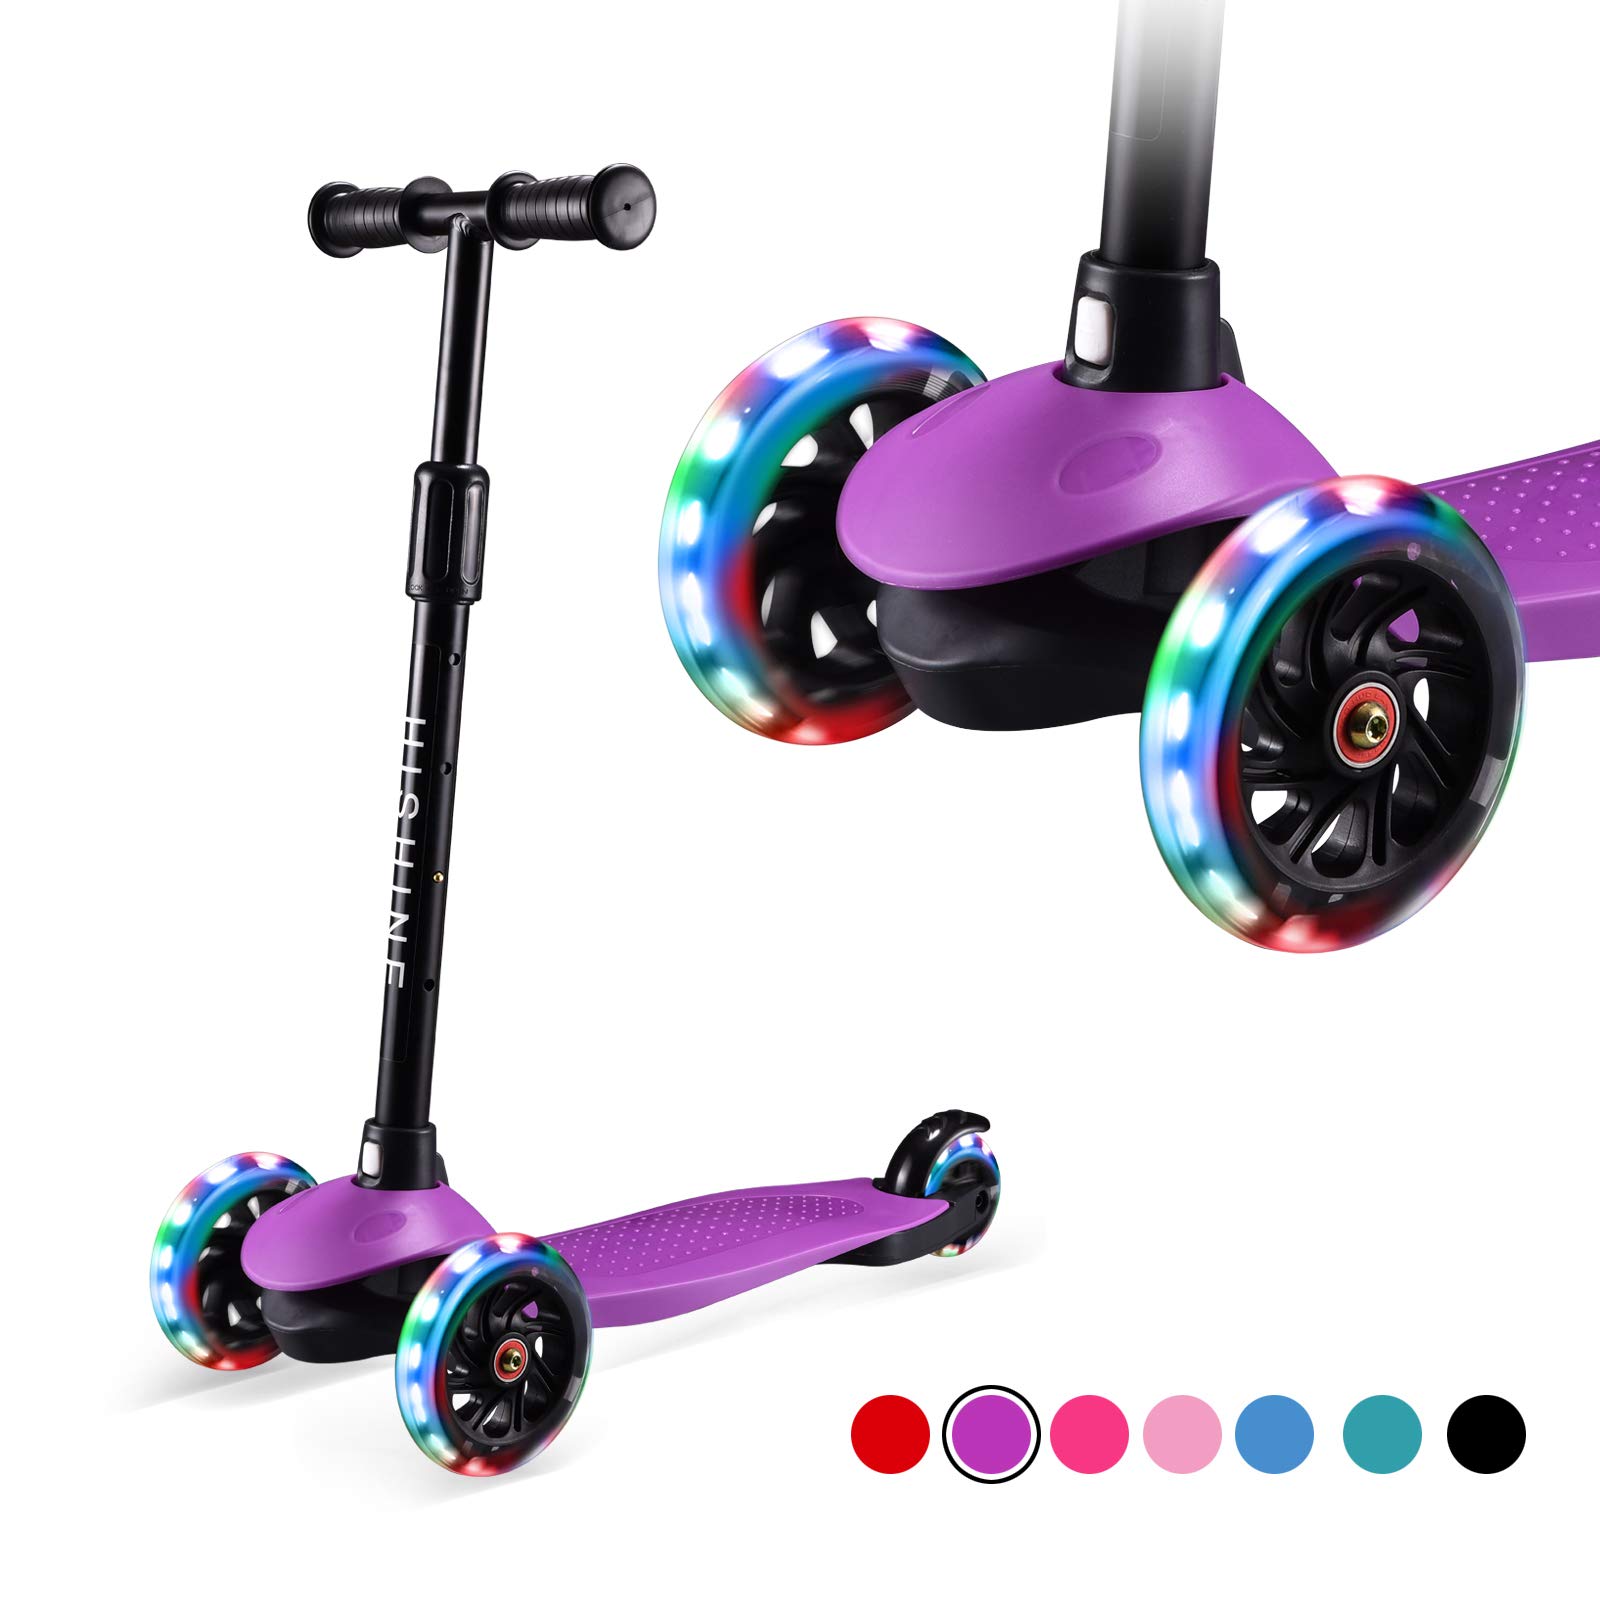 KKA Kids Kick Scooters for Toddlers Boys Girls Ages 2-5 Years Old, Adjustable Height, Extra Wide Deck, Light Up Wheels, Easy to Lear